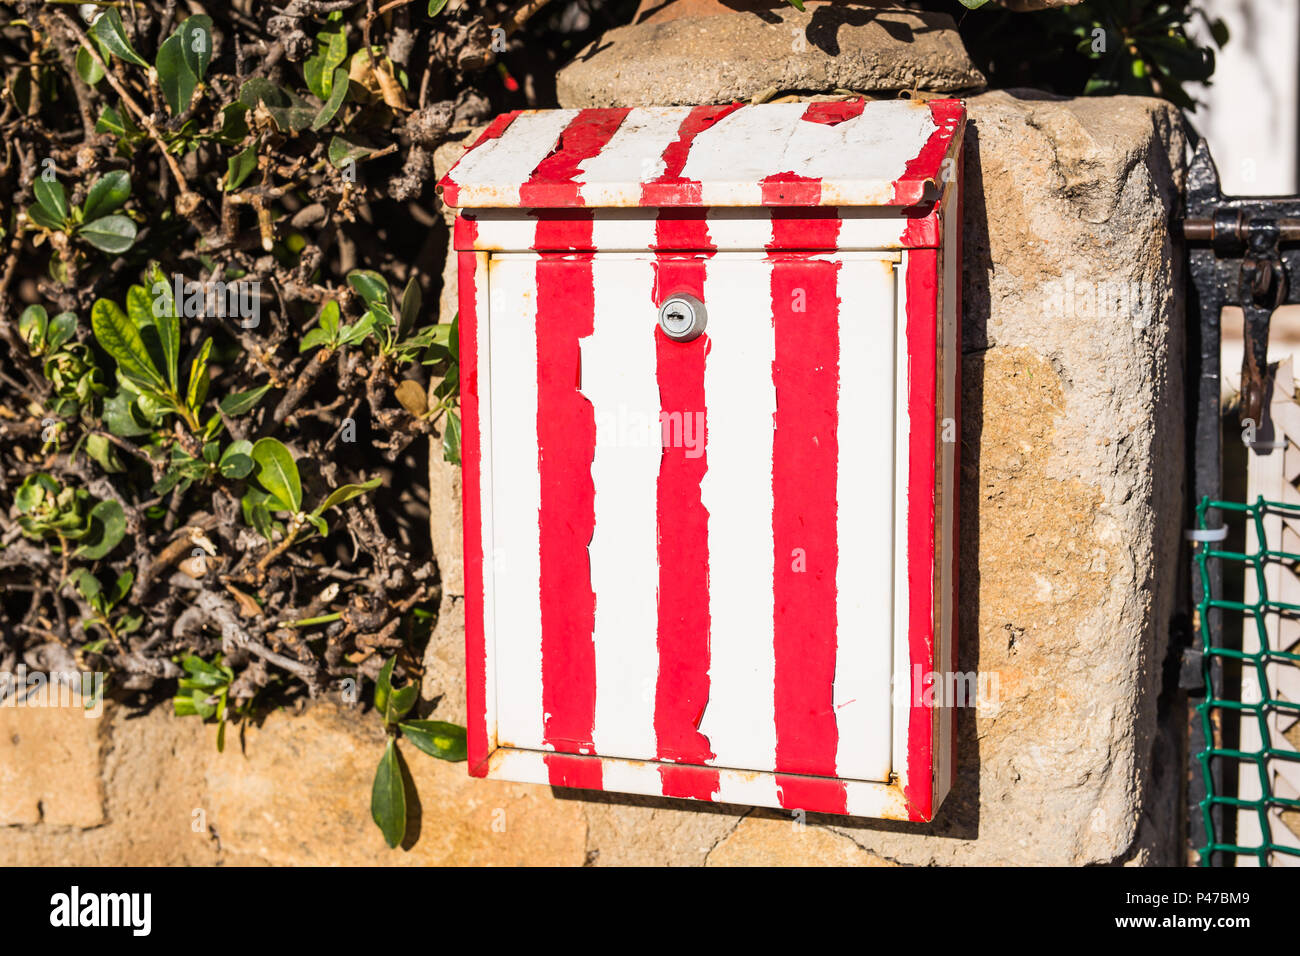 White red stripe mailbox on a stone fence with plants Stock Photo